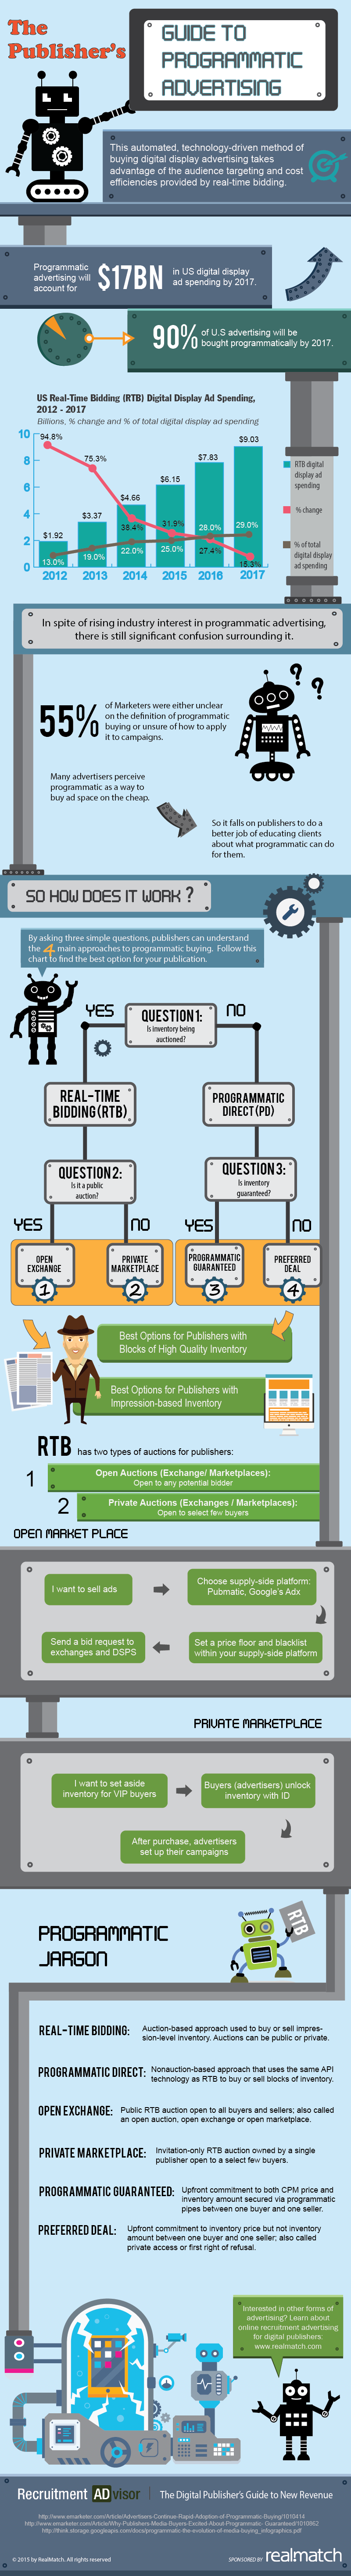 The Publisher's Guide to Programmatic Advertising Infographic